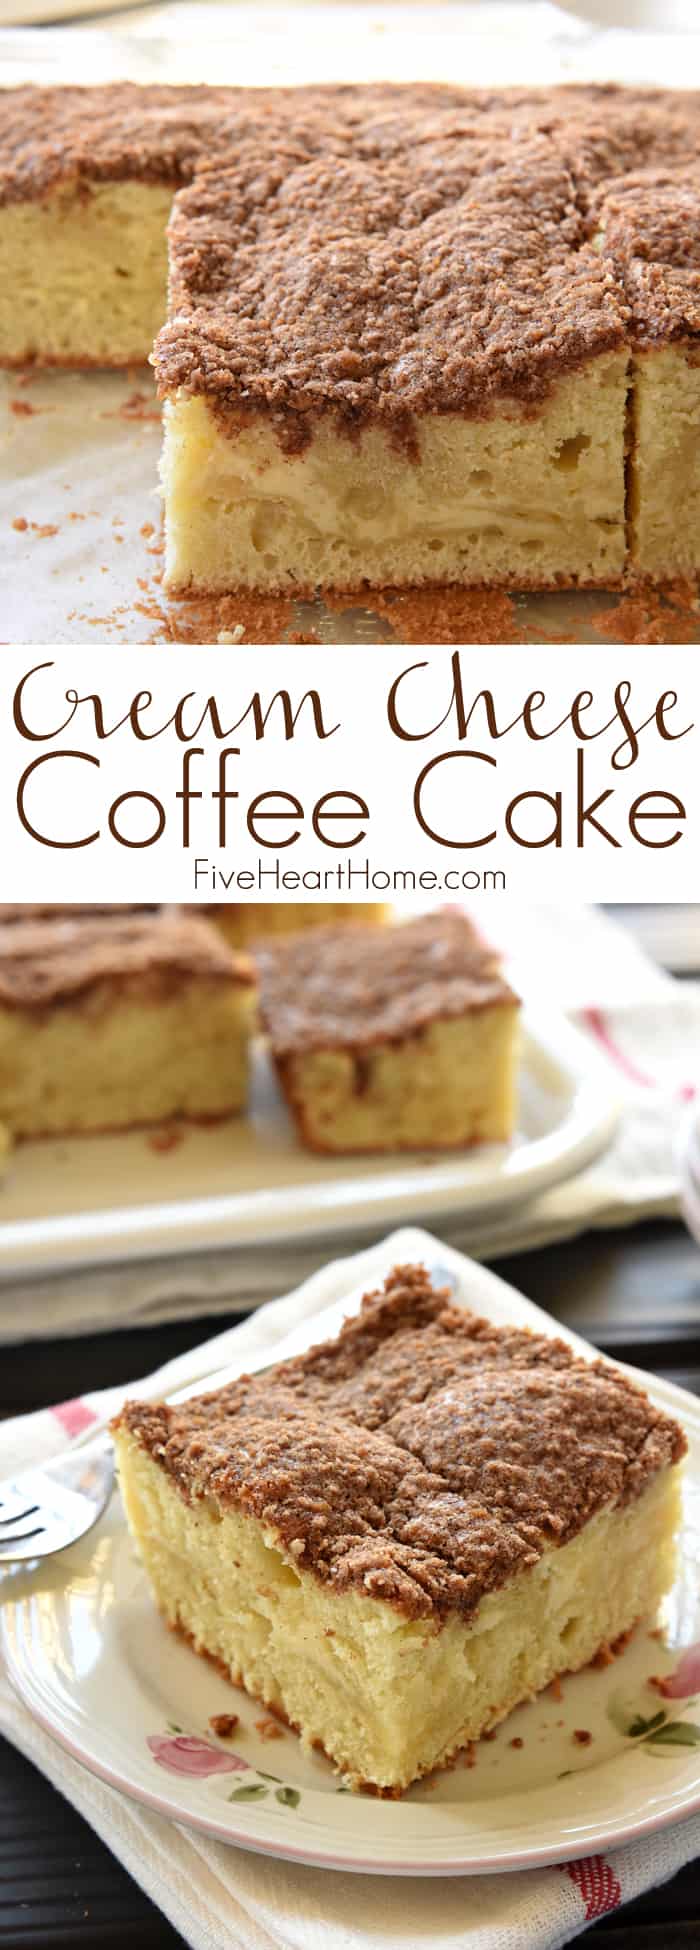 Cream Cheese Coffee Cake ~ swirled with a ribbon of sweet and tangy cream cheese filling and topped with a buttery, cinnamon streusel topping, making it a perfect breakfast, brunch, or coffee time treat! | FiveHeartHome.com via @fivehearthome